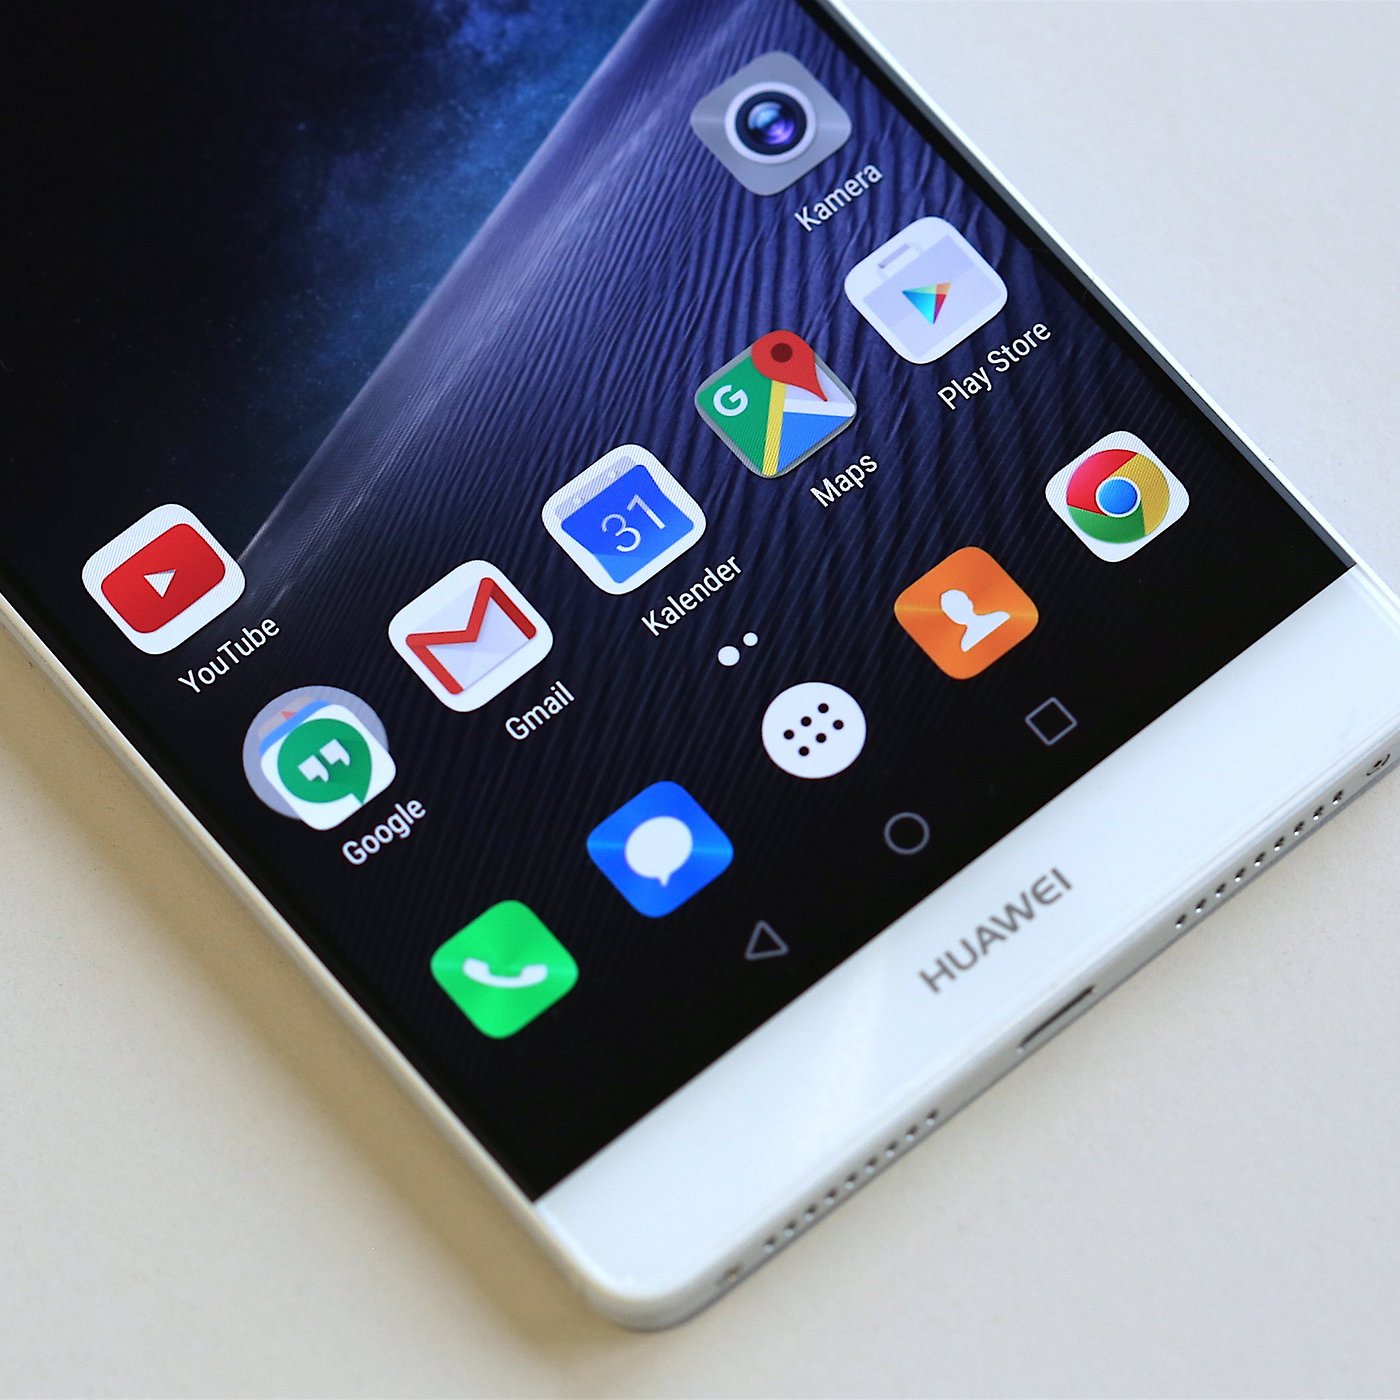 Vriend creatief grens 7 reasons to buy the Huawei Mate 8 | nextpit